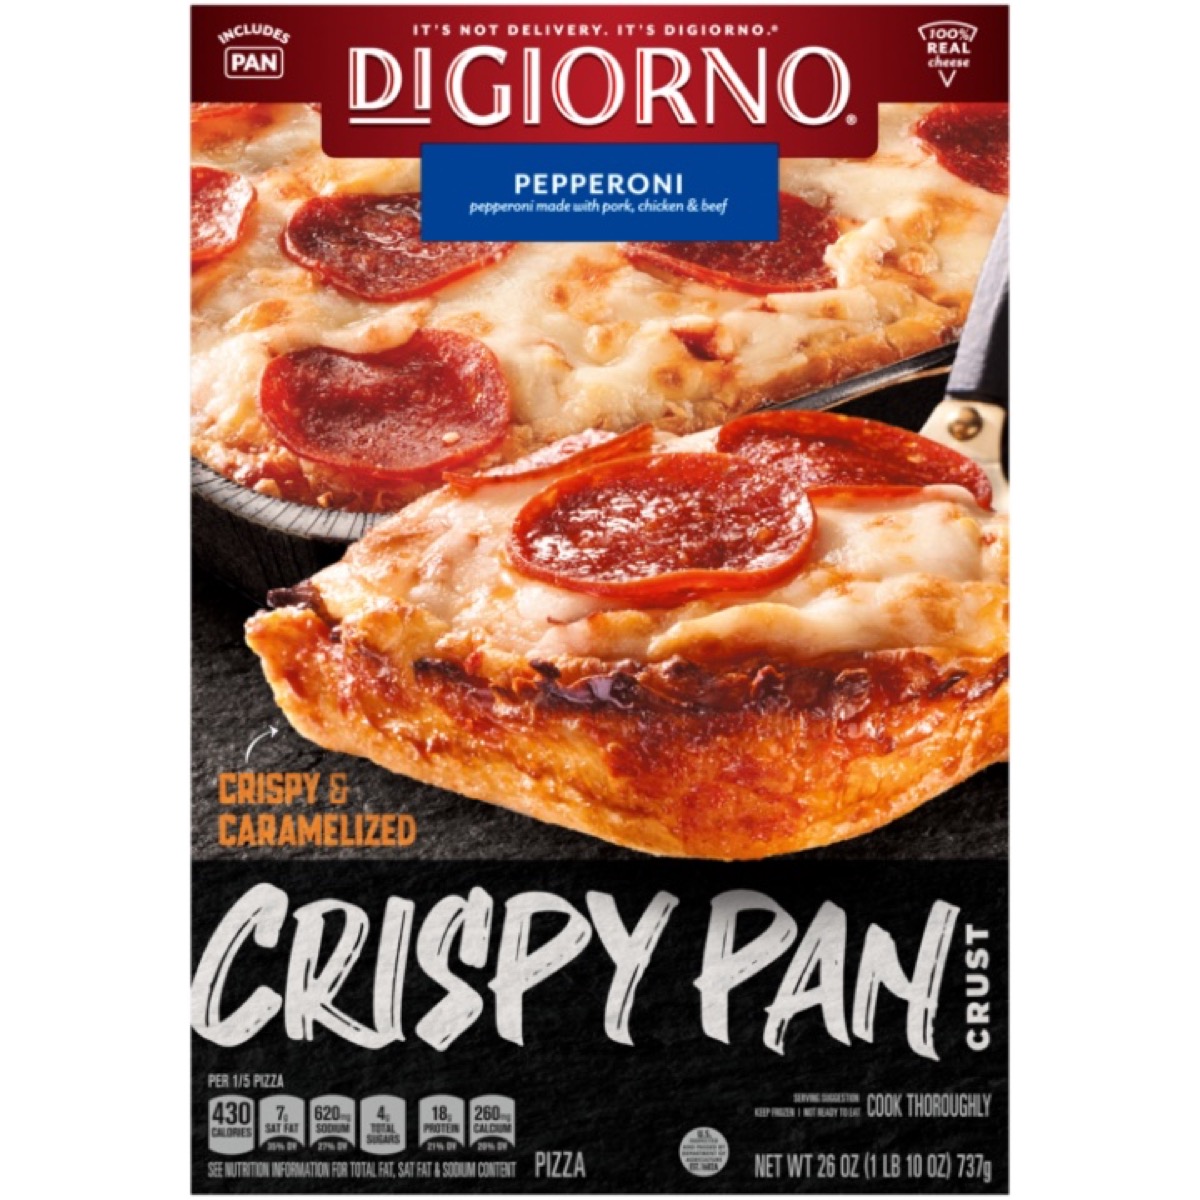 digiorno crispy pan pizza packaging on white background